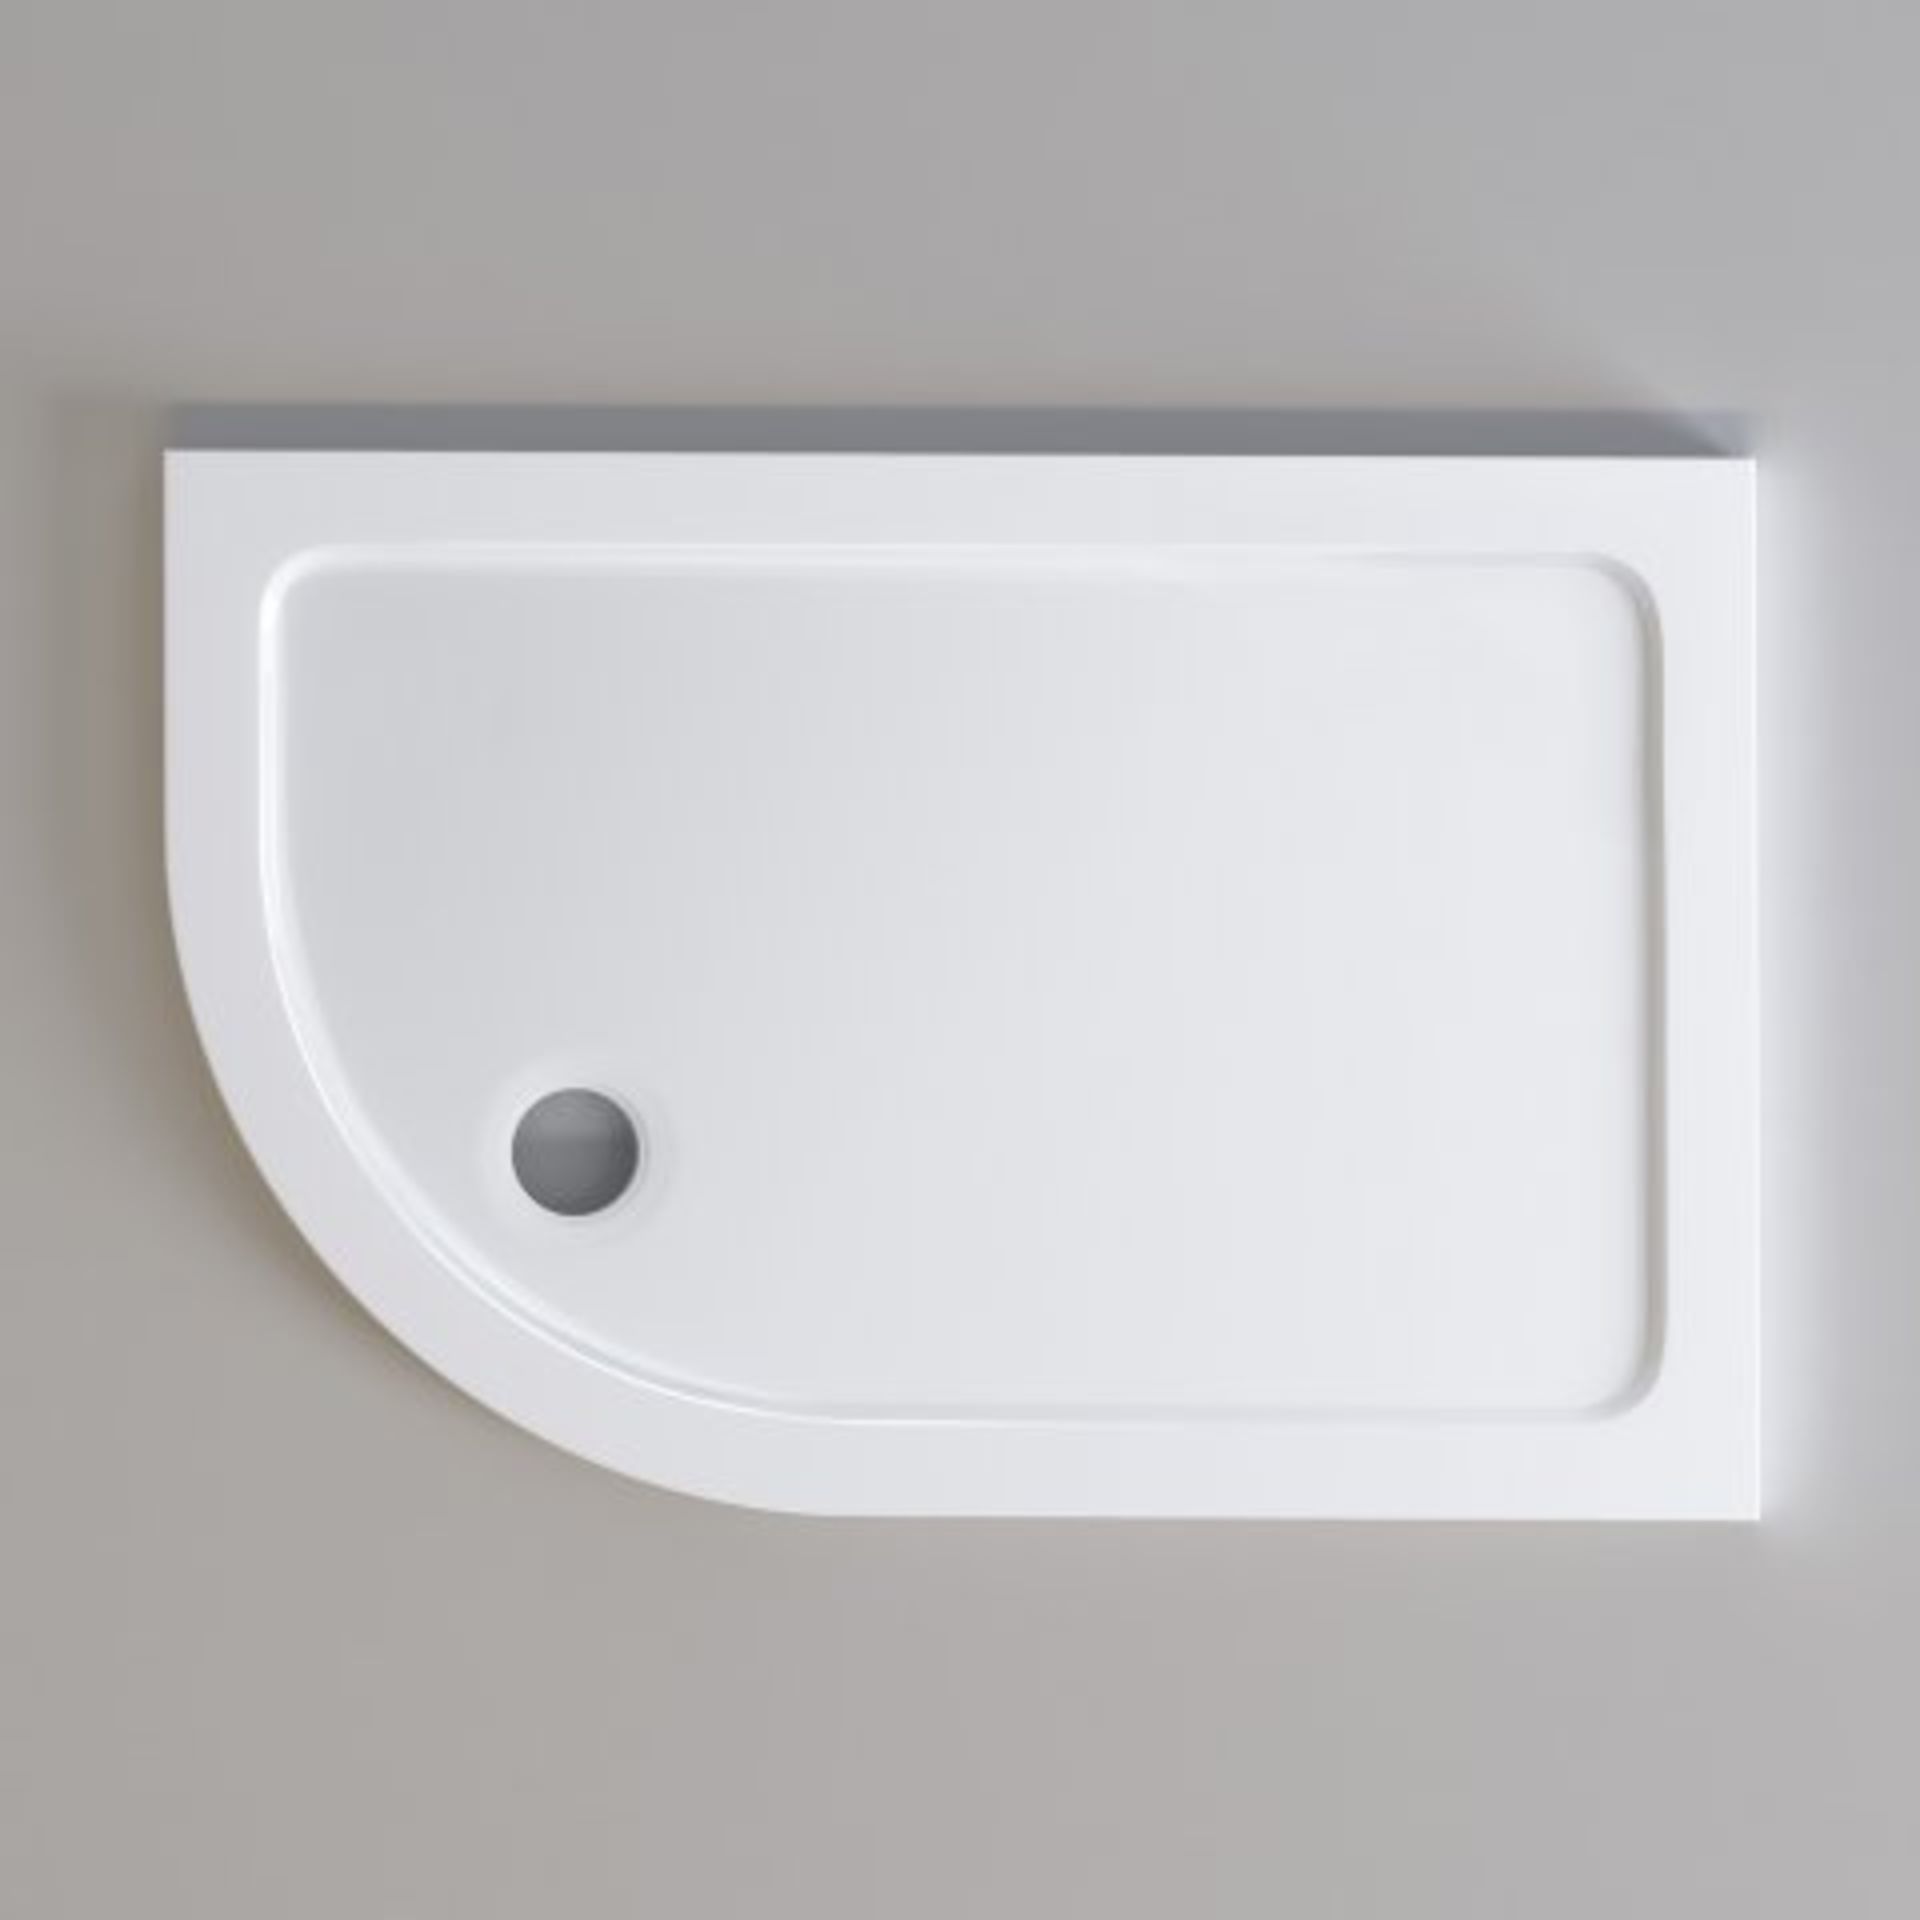 (J29) 1200x800mm Offset Quadrant Ultraslim Stone Shower Tray - Left. RRP £299.99. Magnificently - Image 2 of 2